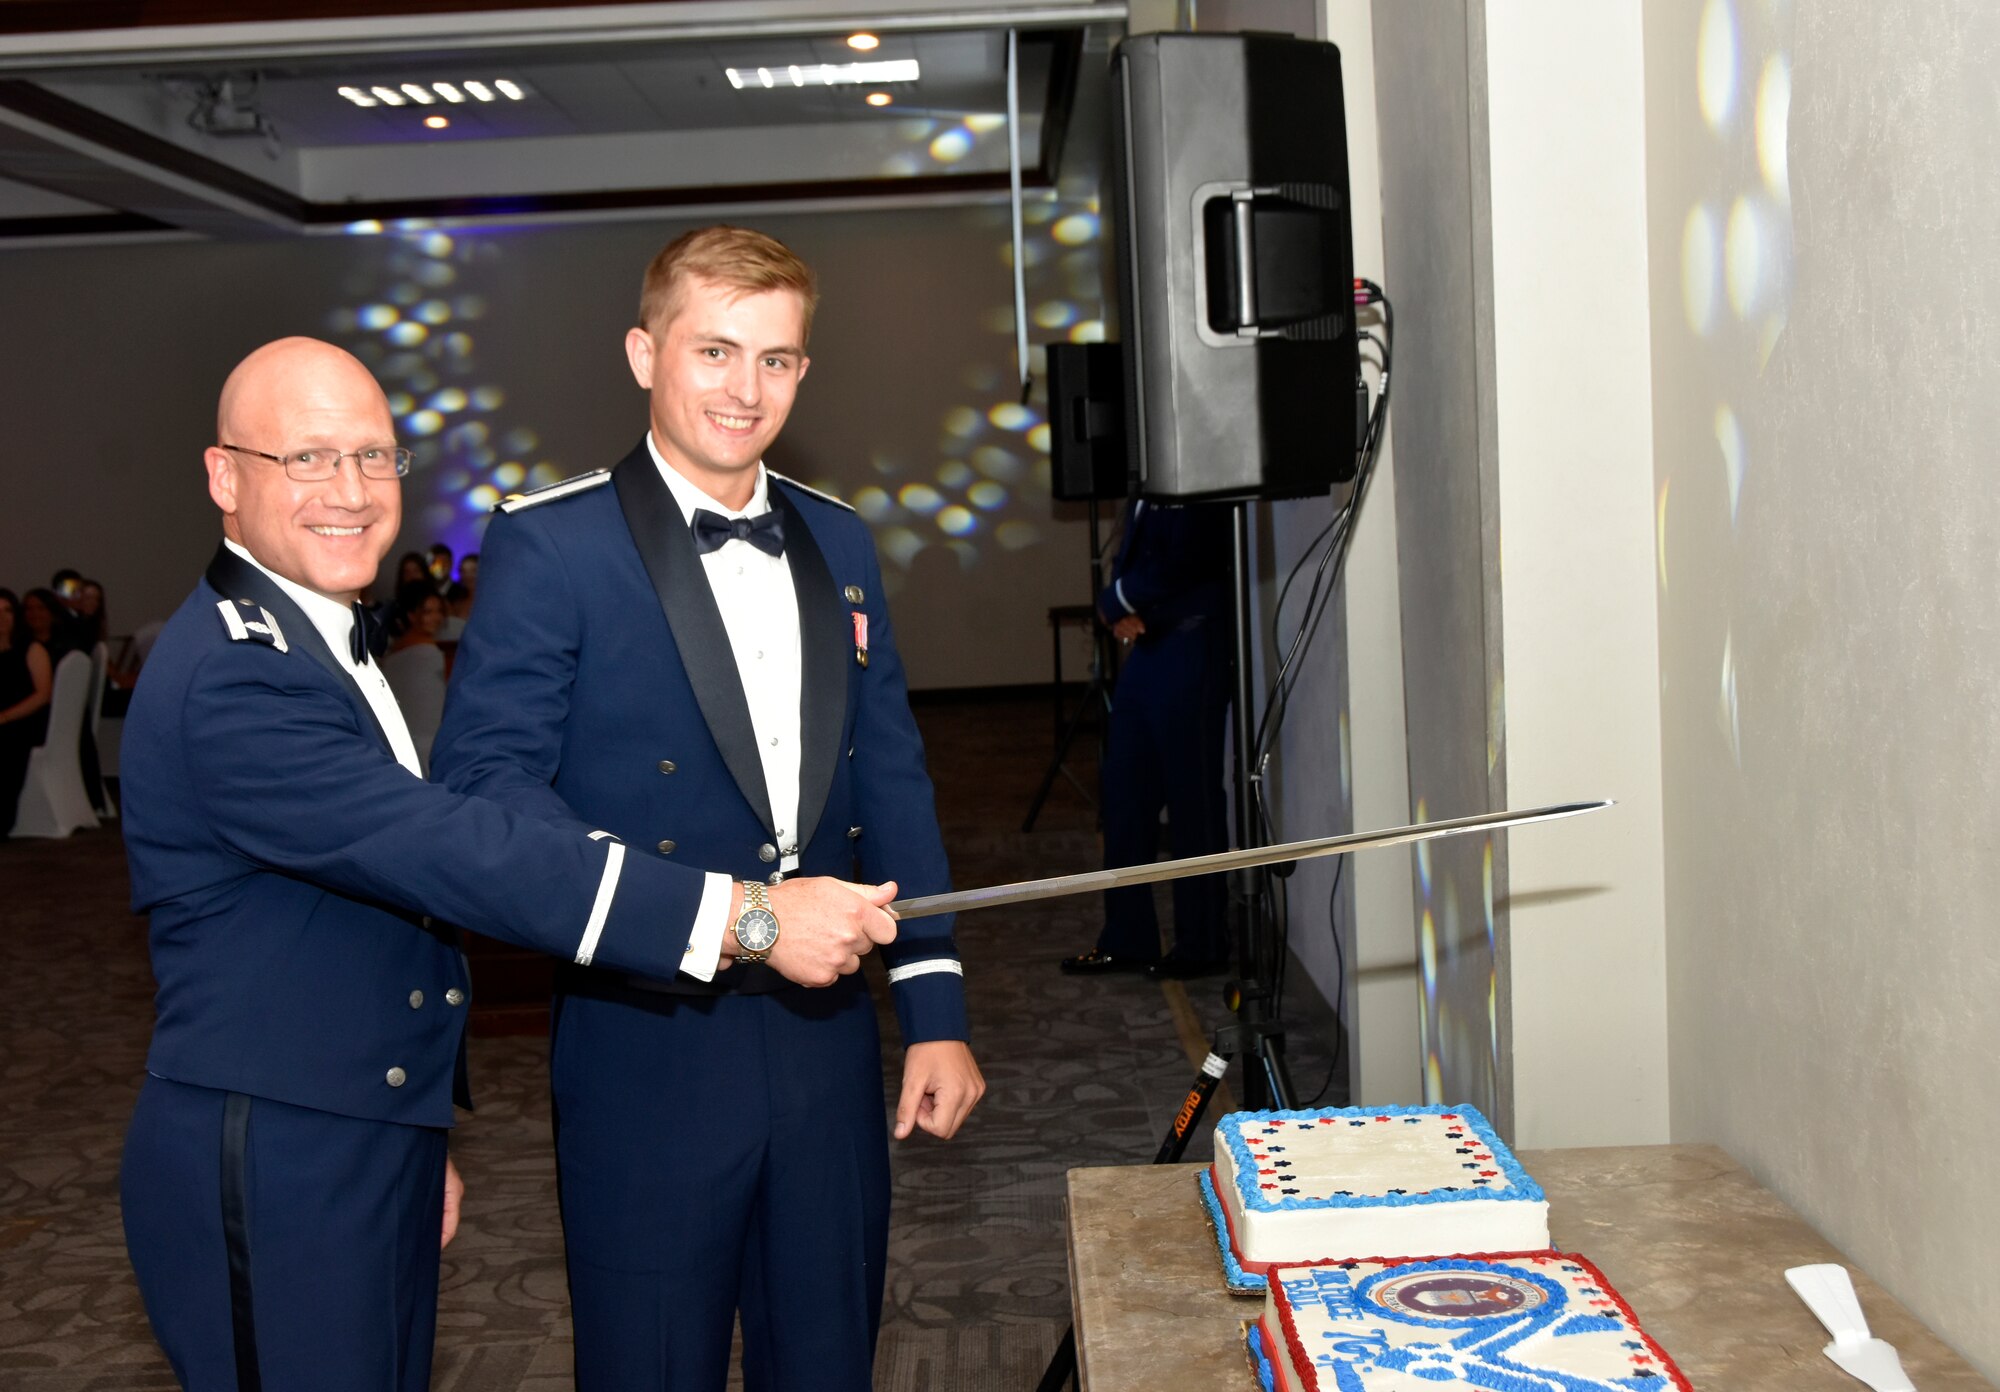 Lt. Col. Eric Withrow, left, and 2nd Lt. Patrick Robbins cut the Air Force birthday cake Sept. 9, 2023, during the Arnold Engineering Development Complex Air Force Ball. The ball, hosted by the Company Grade Officers’ Council at Arnold Air Force Base, Tenn., headquarters of AEDC, was held at the Manchester/Coffee County Conference Center to coincide with the celebration of the U.S. Air Force’s 76th birthday. It is tradition for the youngest Airman, in this case Robbins, and the oldest to cut the cake together. (U.S. Air Force photo by Bradley Hicks)